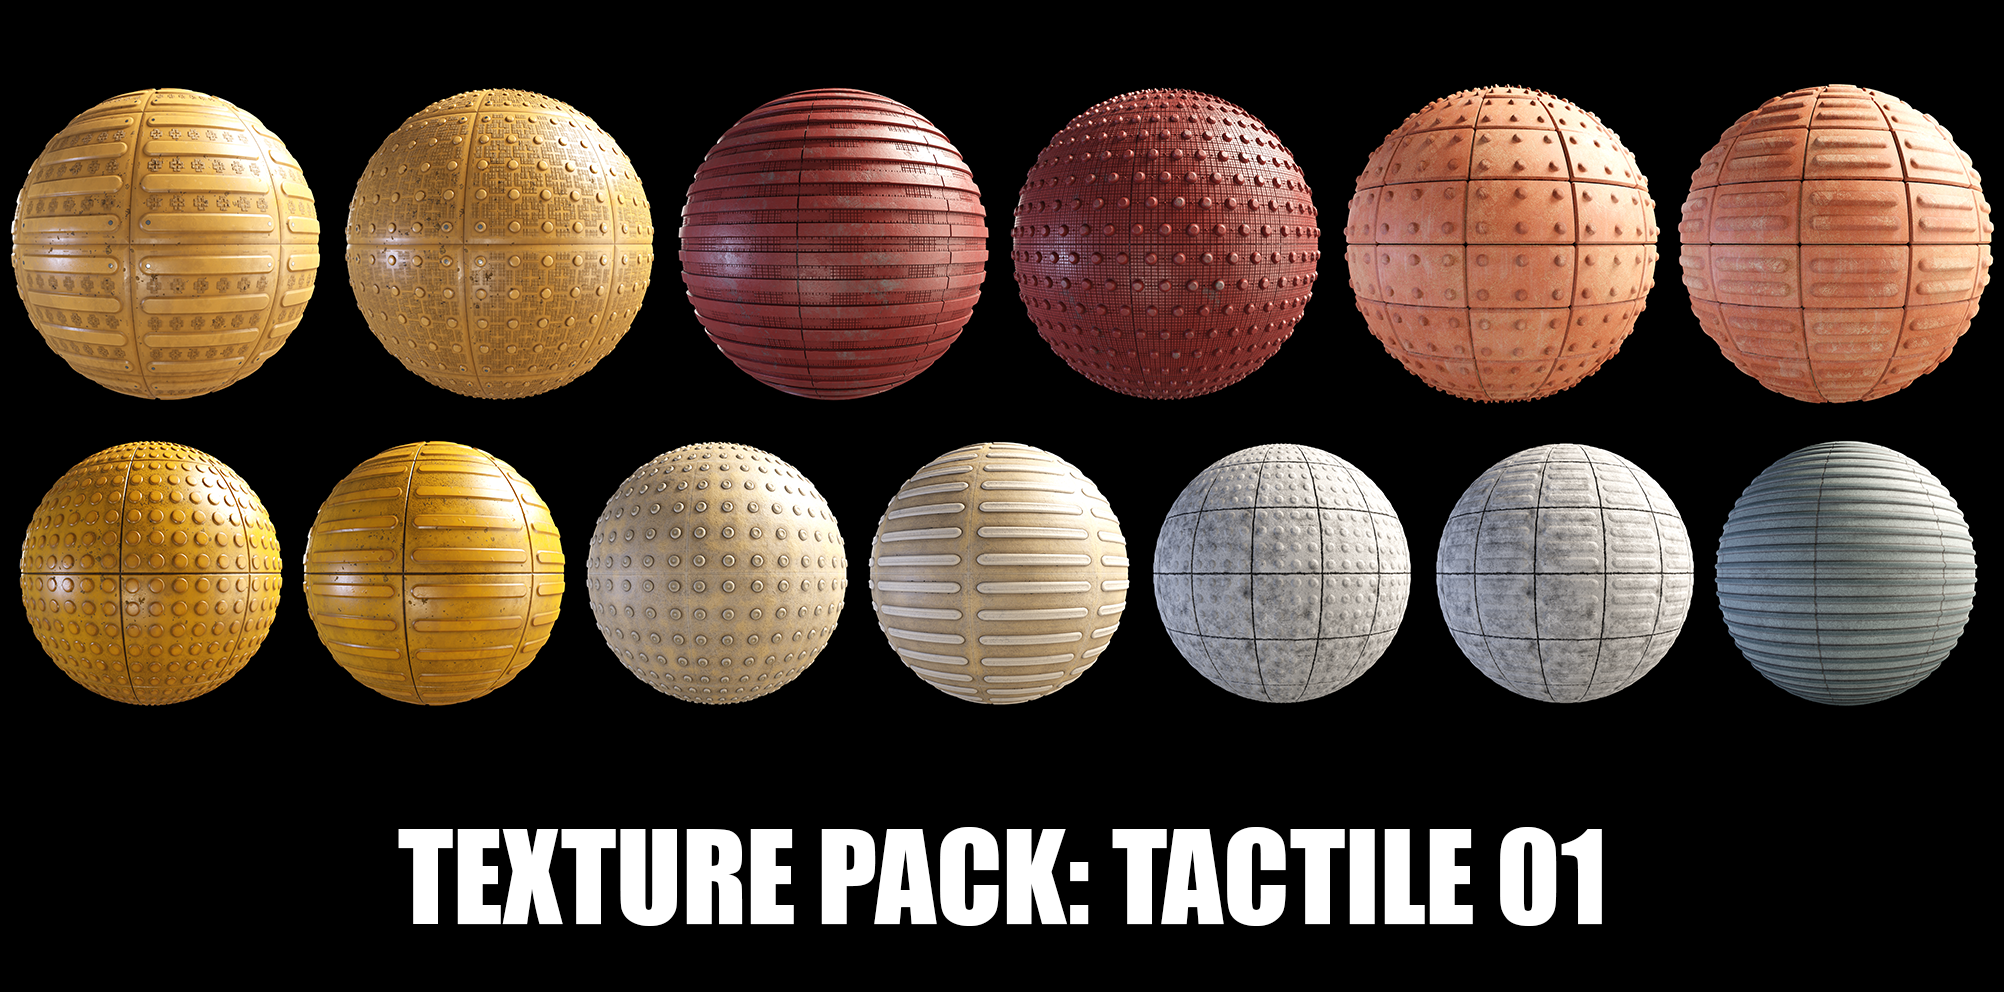 Texture Pack: Tactile 01